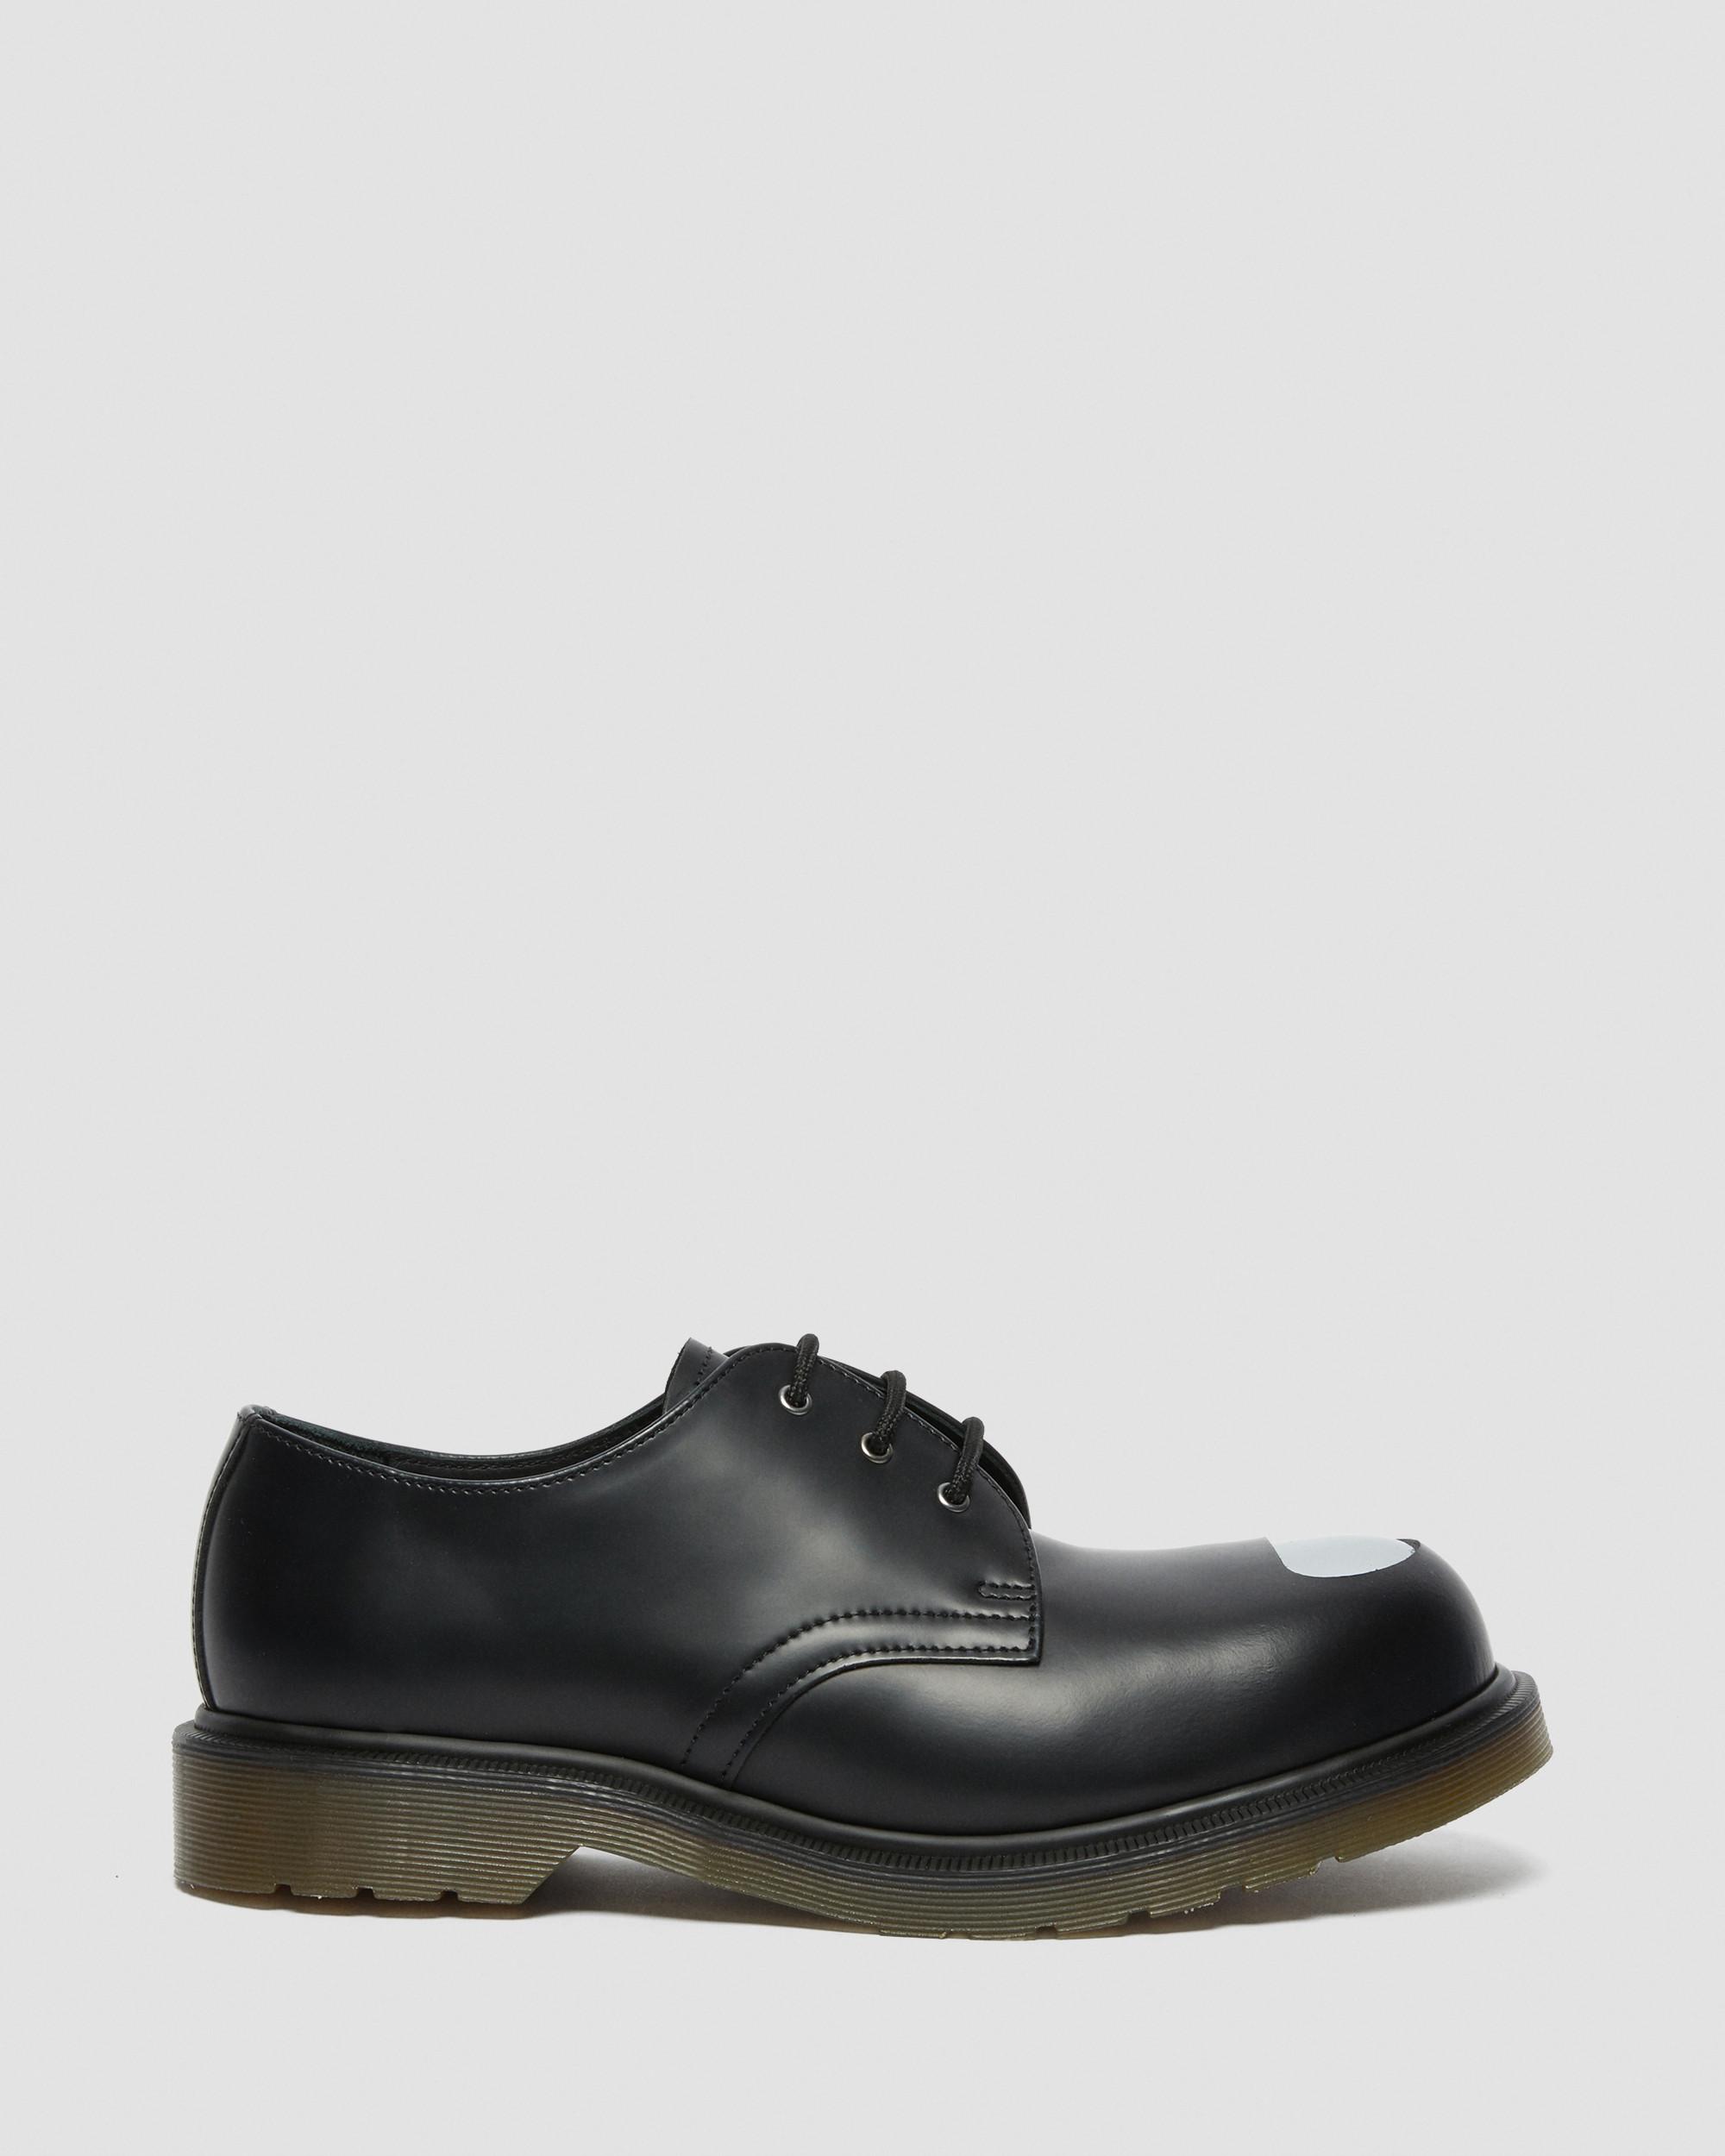 1925 Exposed Steel Toe Leather Shoes | Dr. Martens